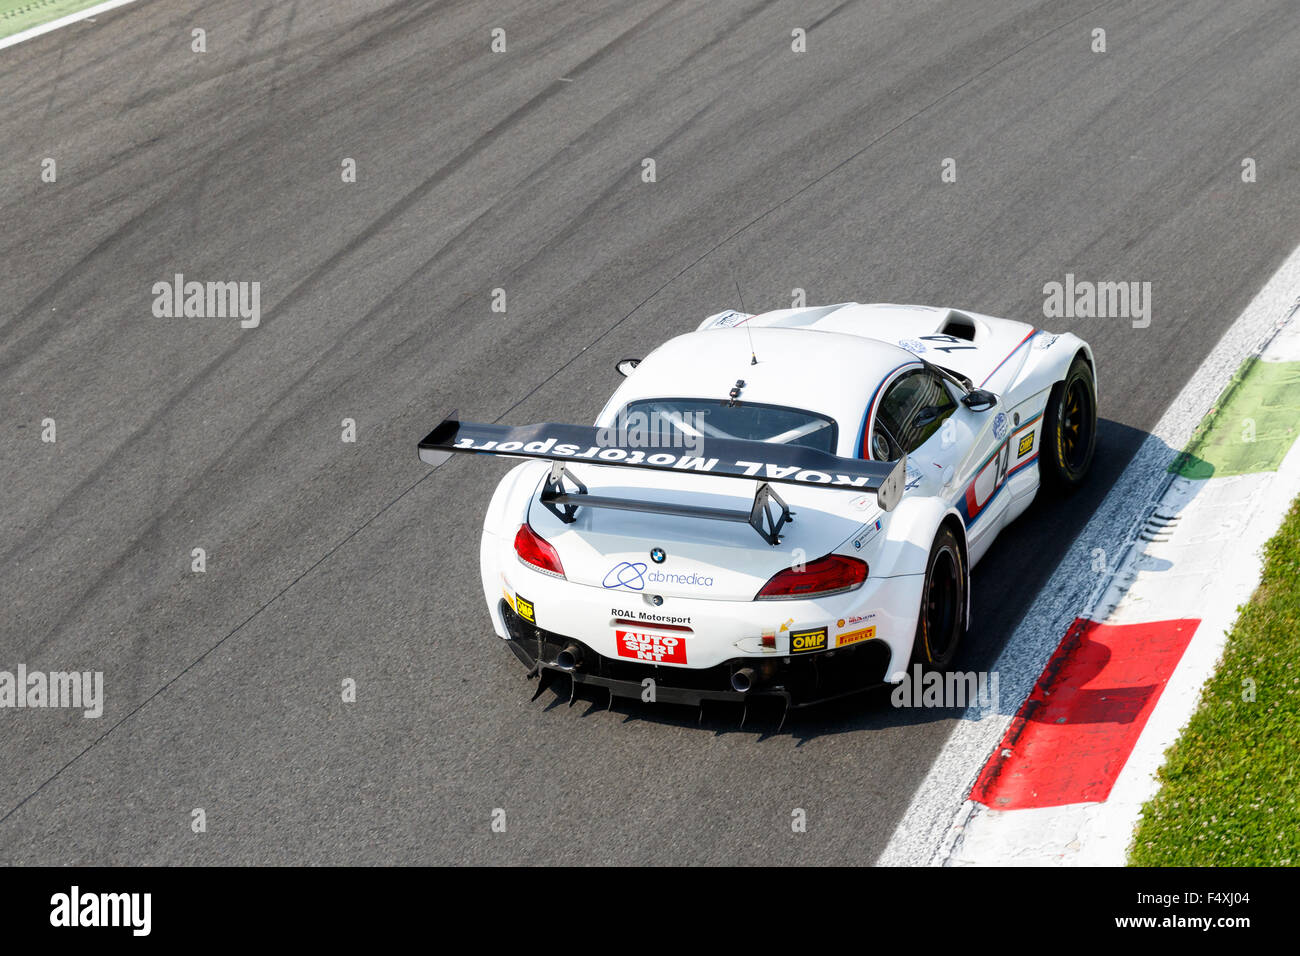 Monza, Italy - May 30, 2015: Bmw Z4 of Roal Motorsport team, driven  by Cerruti Michela) during the C.I. Granturismo - Race Stock Photo